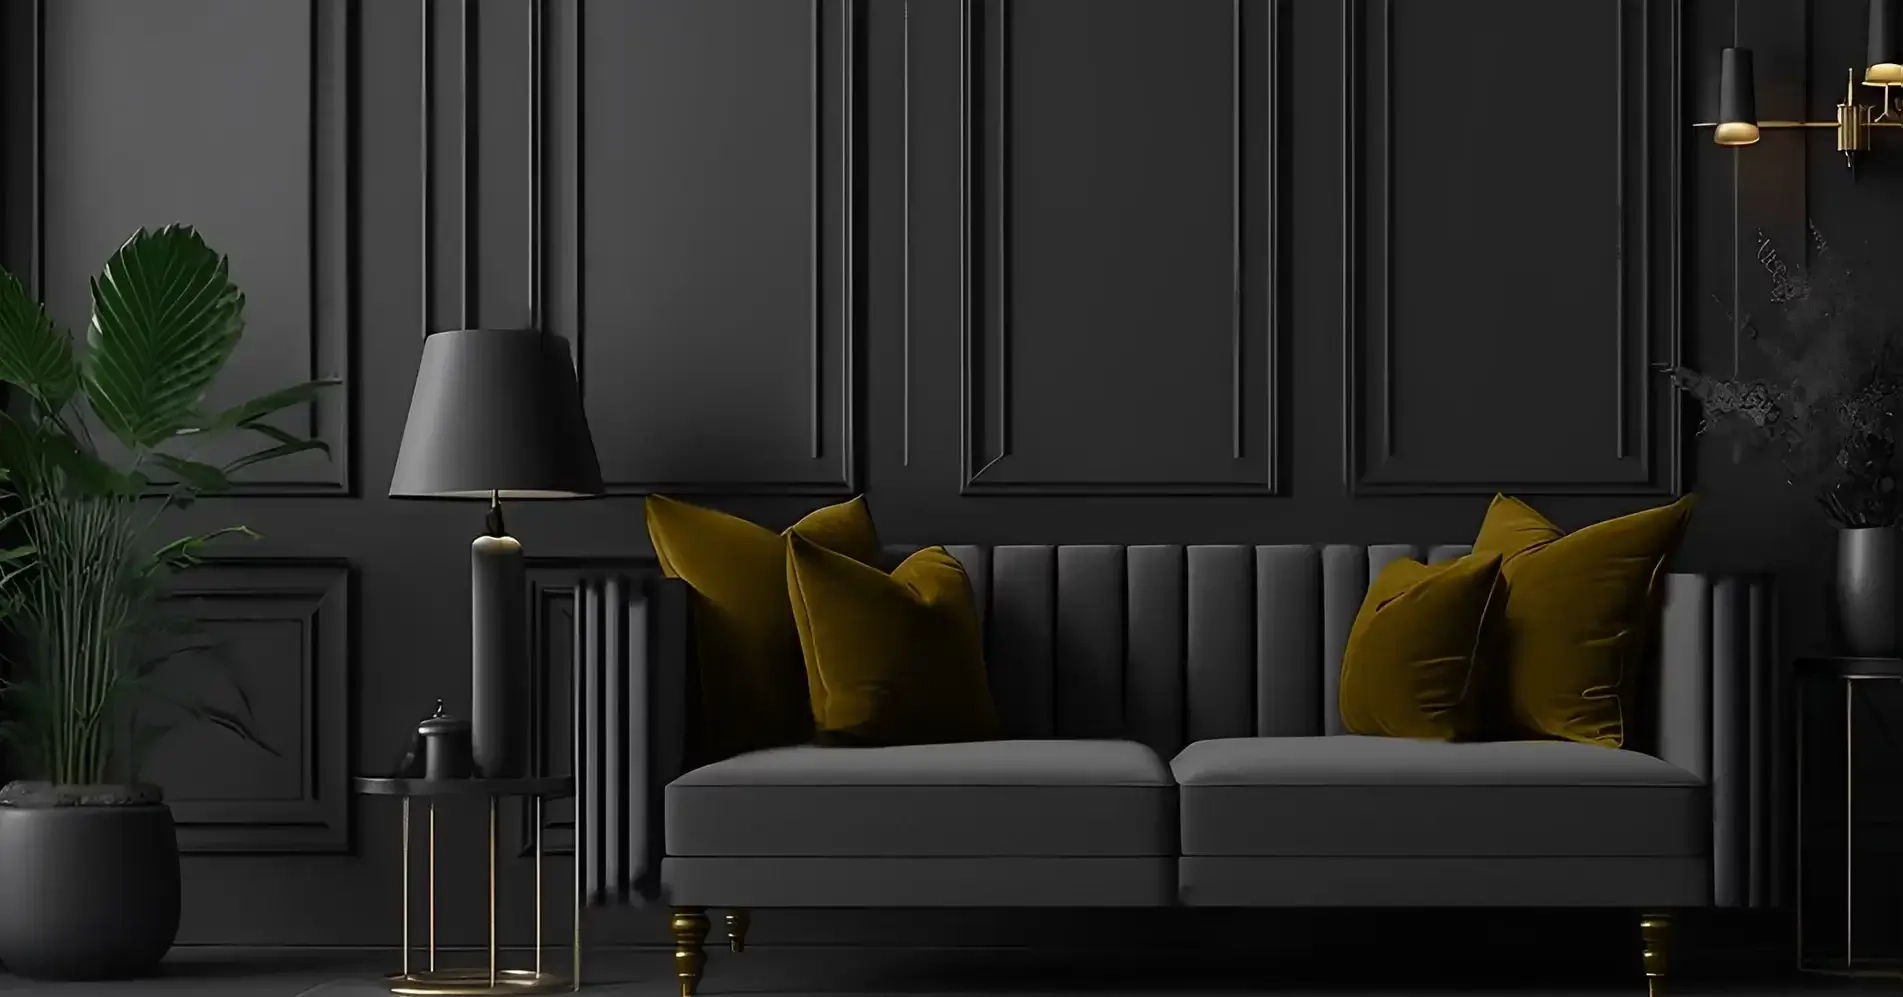 A chic living room with a black and gold palette. A cozy sofa and two sleek lamps create a refined atmosphere in this elegant space.